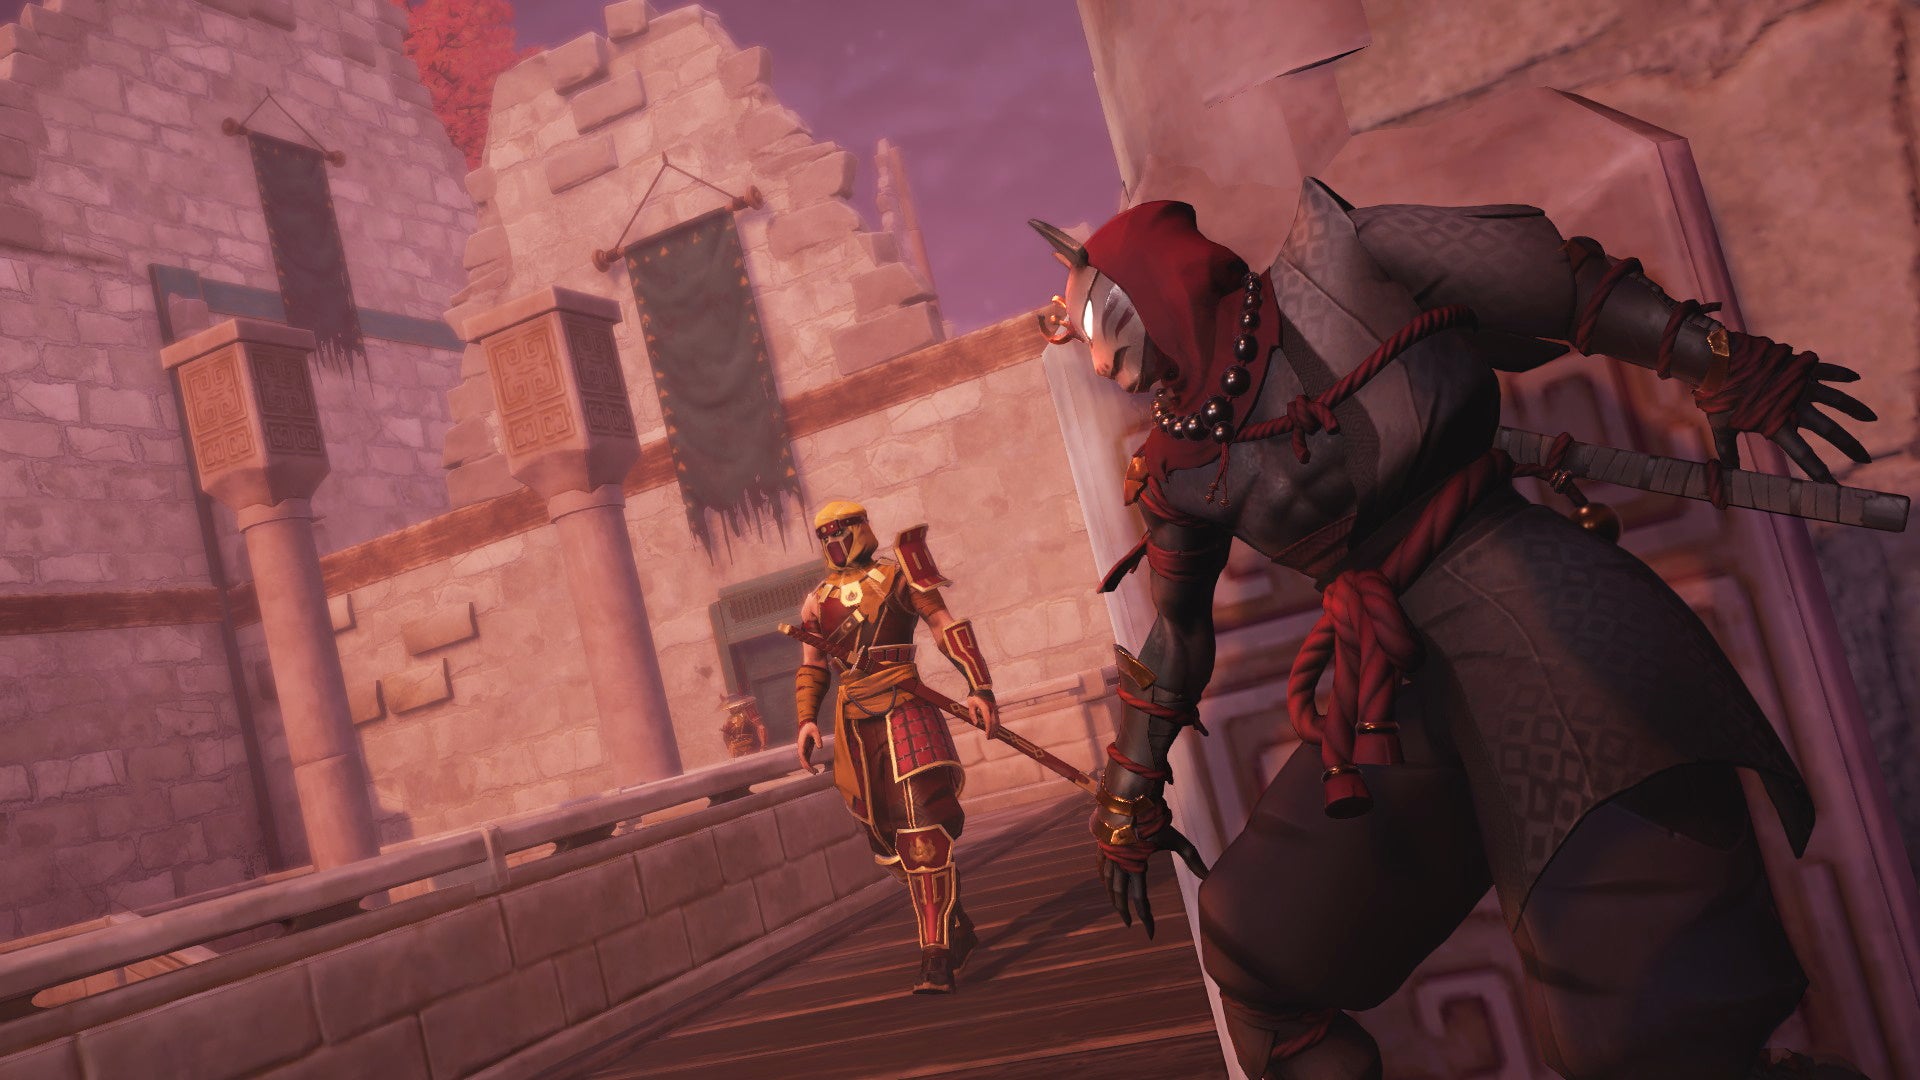 An image from Aragami 2 which shows the player hugging a wall, reading to pounce as a guard approaches.